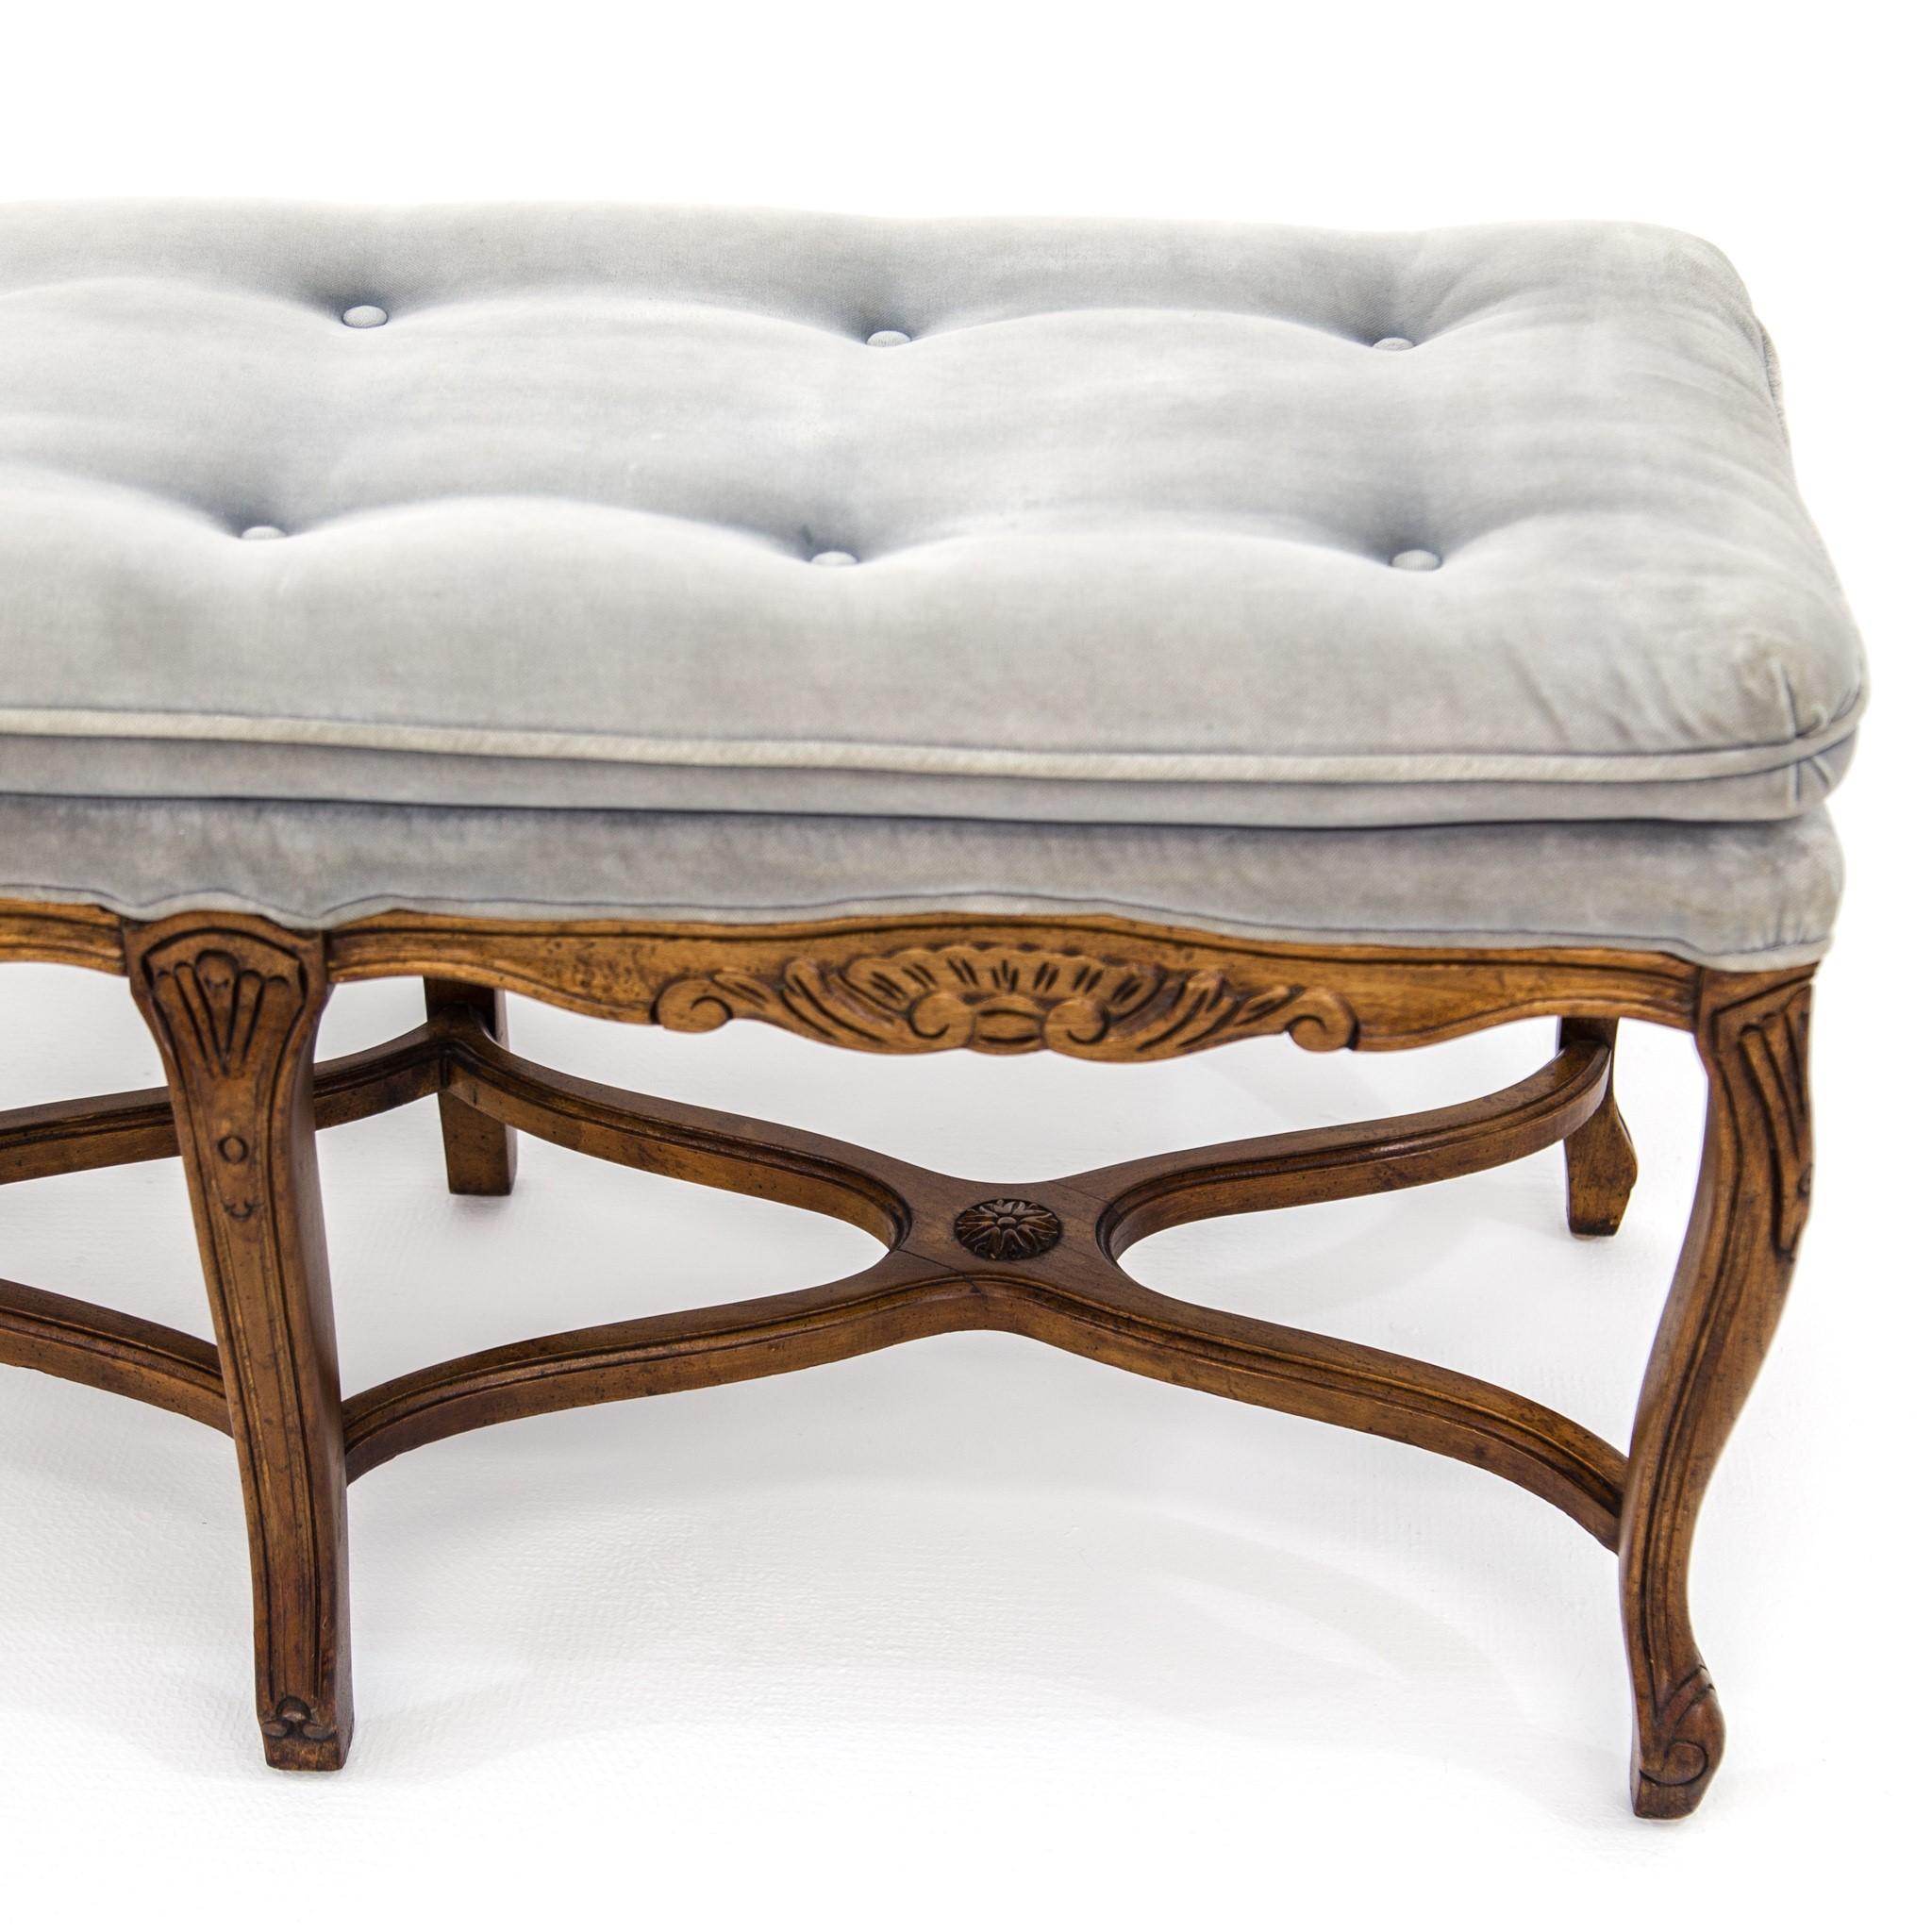 20th Century Louis XV Carved Walnut Bench with Gray Tufted Velvet Upholstery by Bernhardt